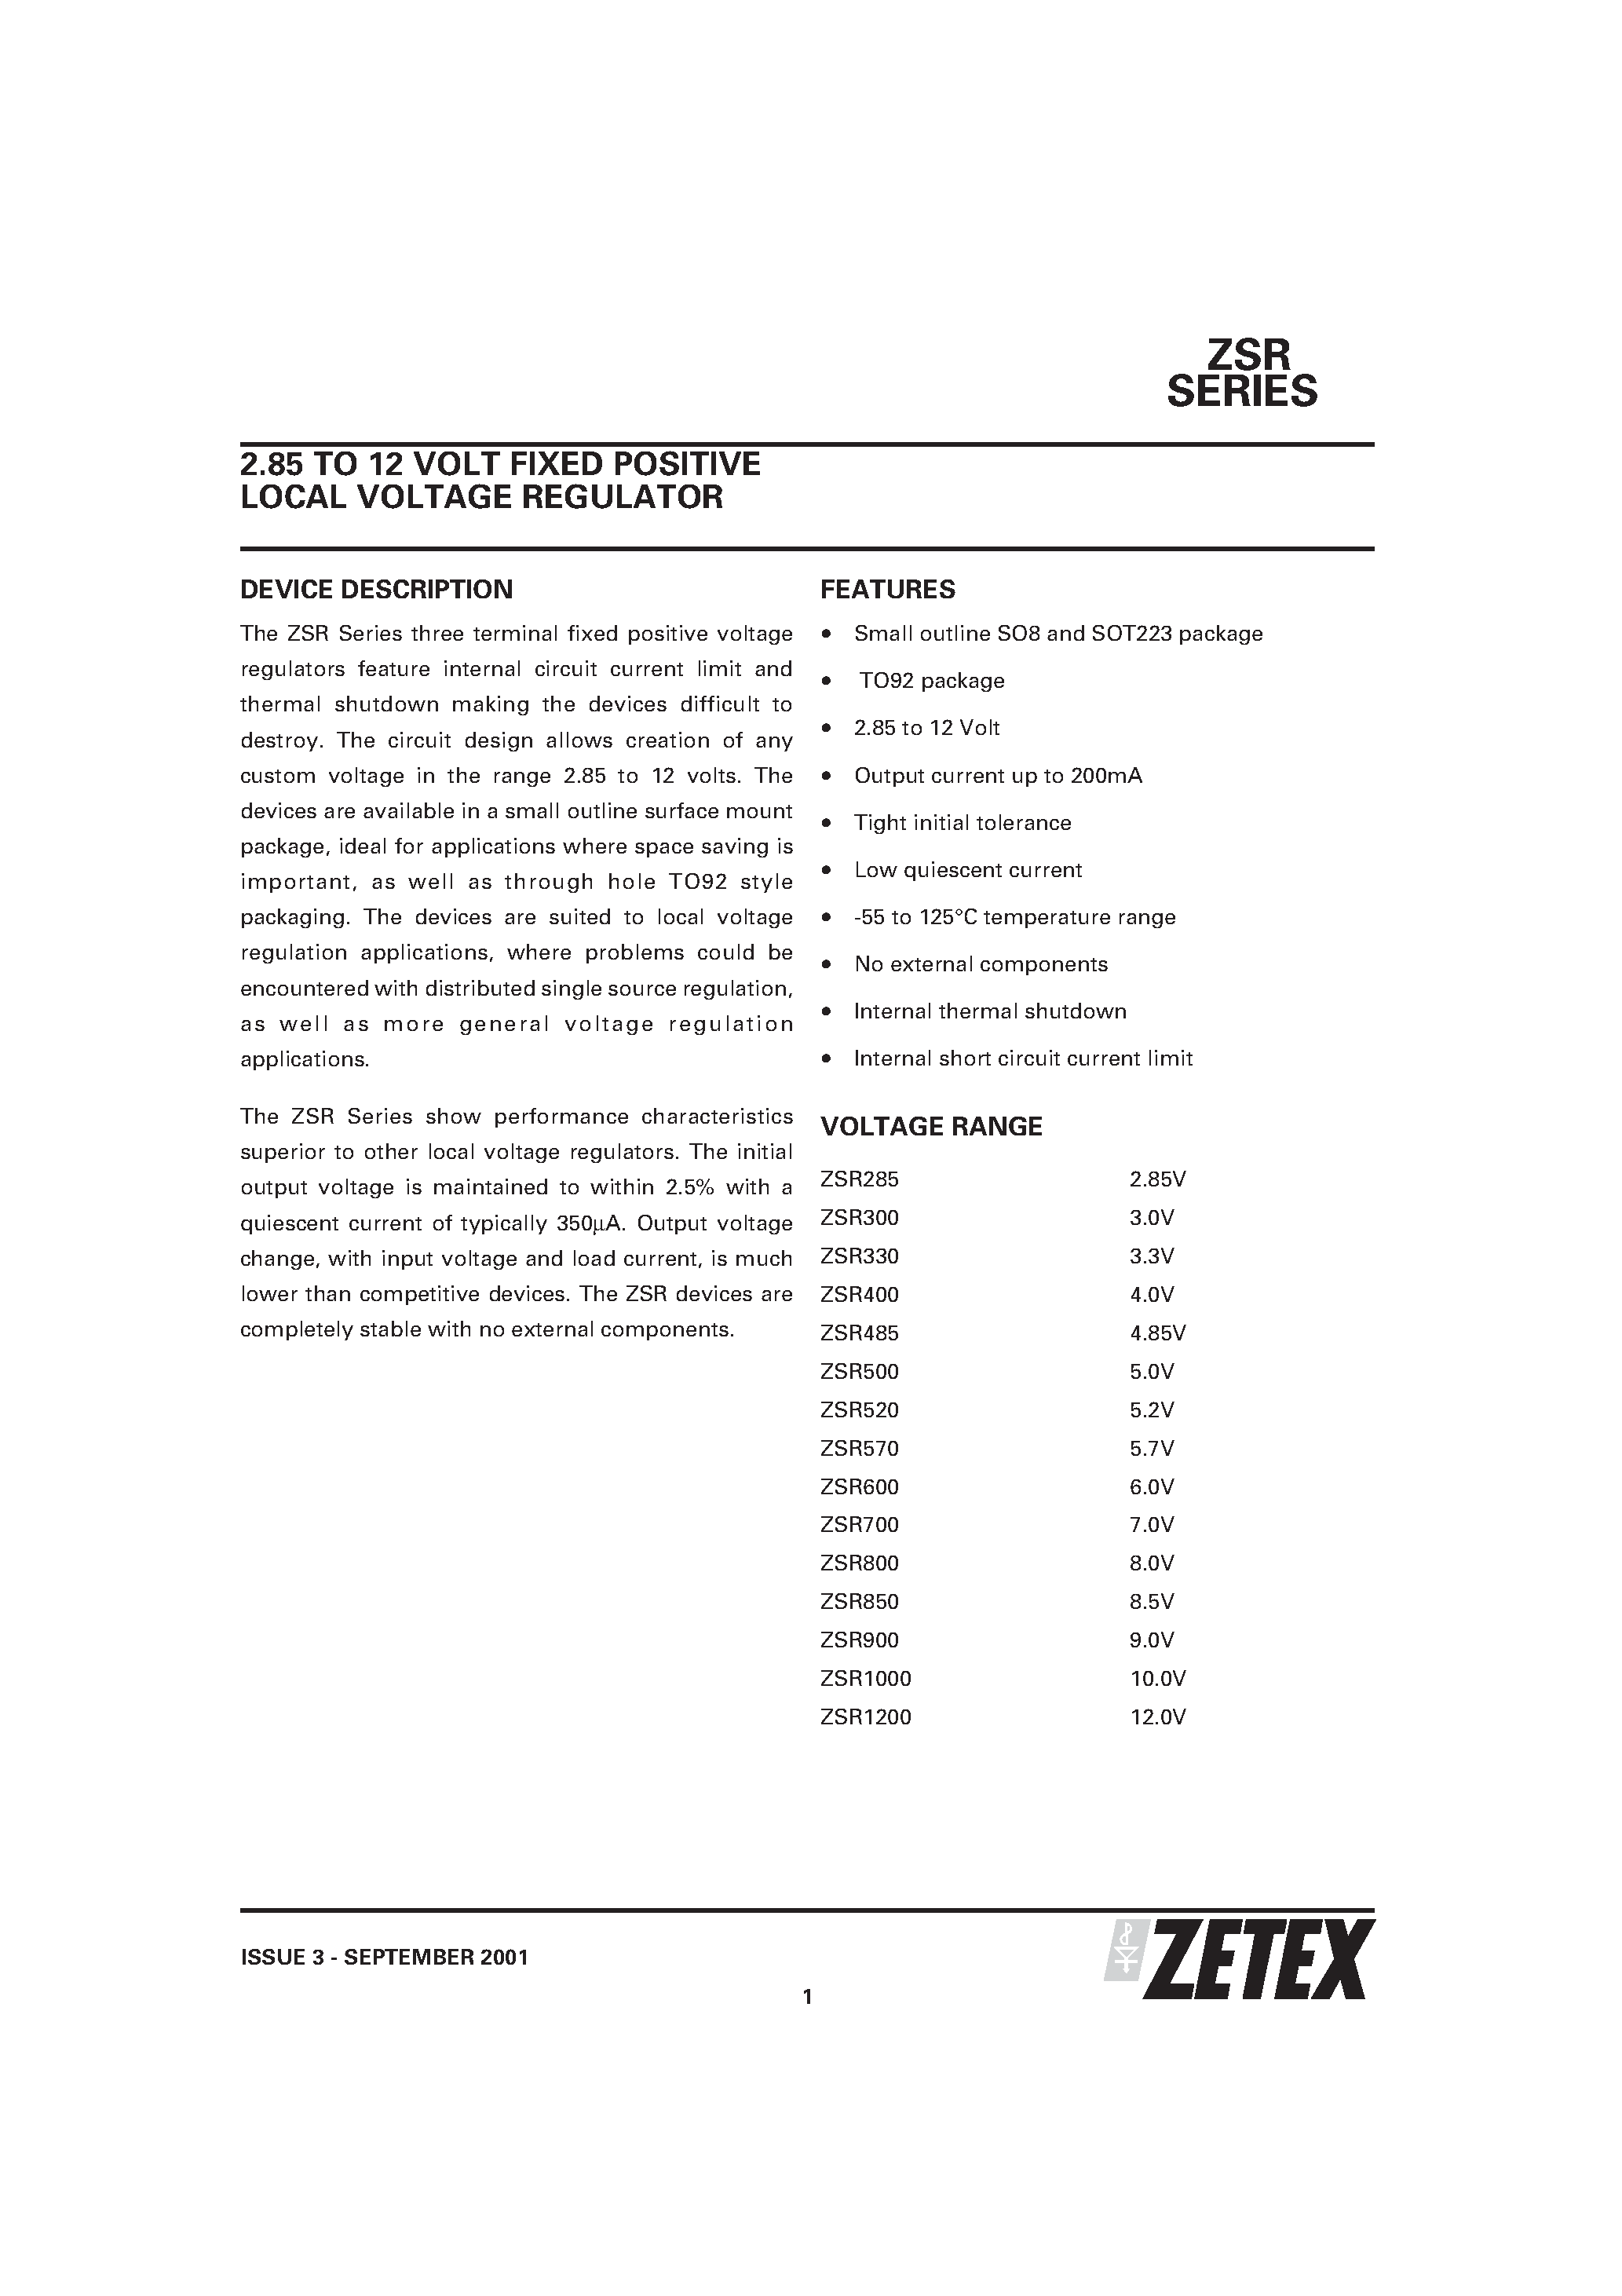 Datasheet ZSR850C - 2.85 TO 12 VOLT FIXED POSITIVE LOCAL VOLTAGE REGULATOR page 1